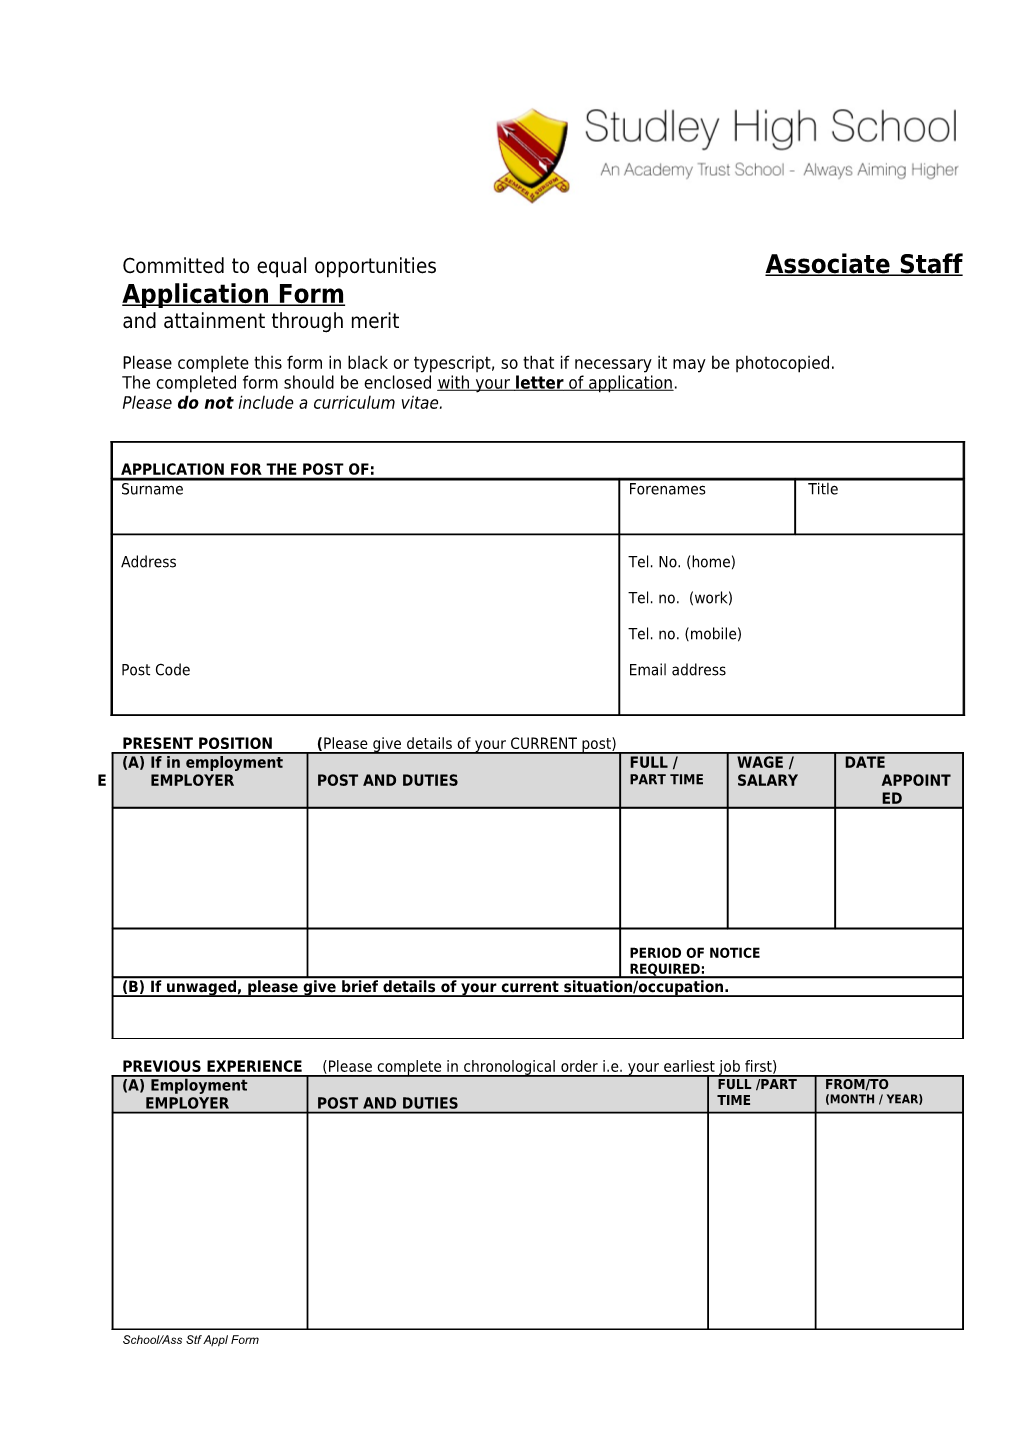 Committed to Equal Opportunities Associate Staff Application Form